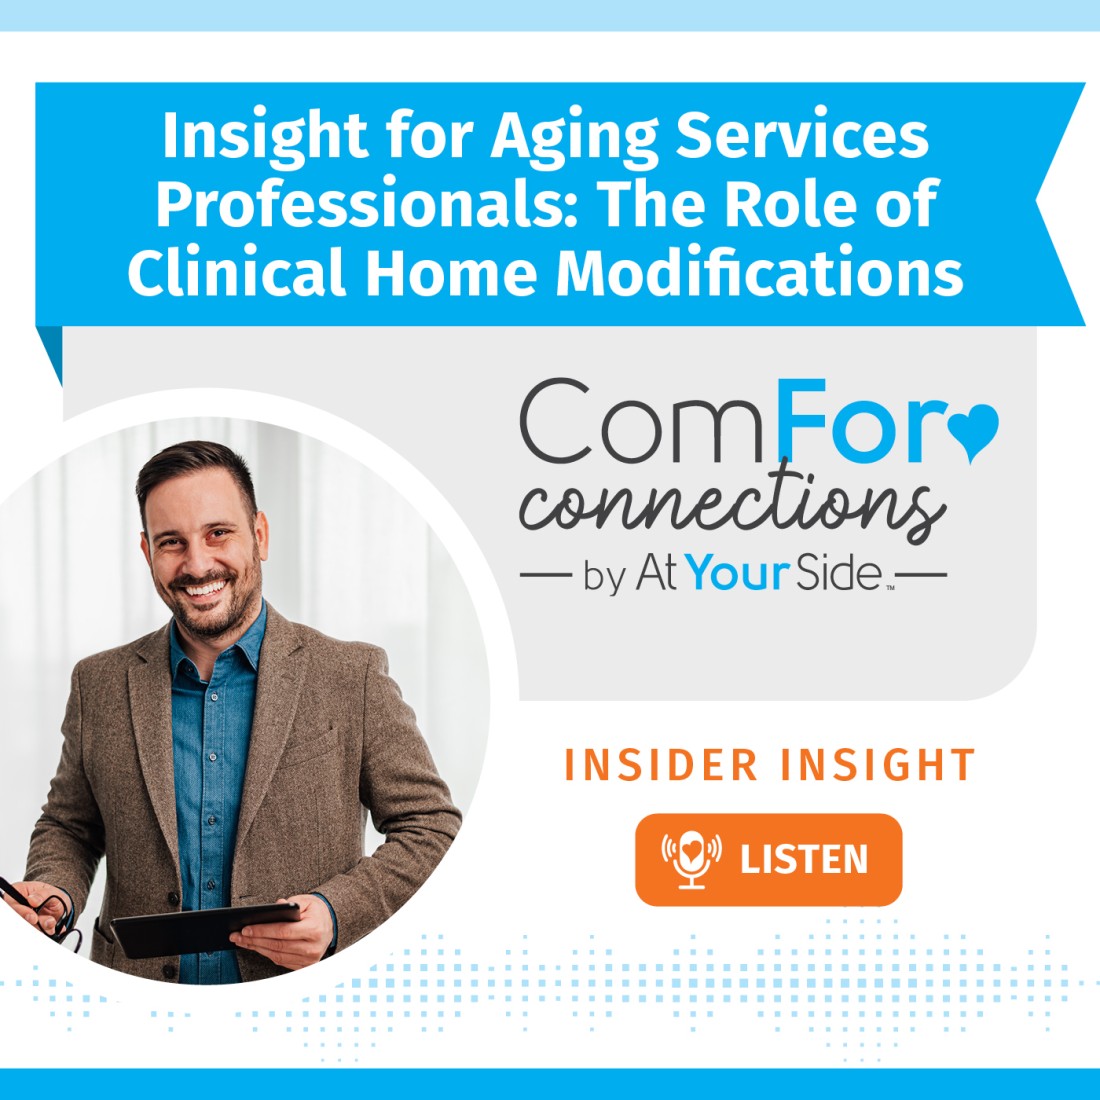 Podcast Resources: Expanding Your Home Care Knowledge - AYS_Social_Media__Insight_for_Aging_Services_Professionals__The_Role_of_Clinical_Home_Modifications